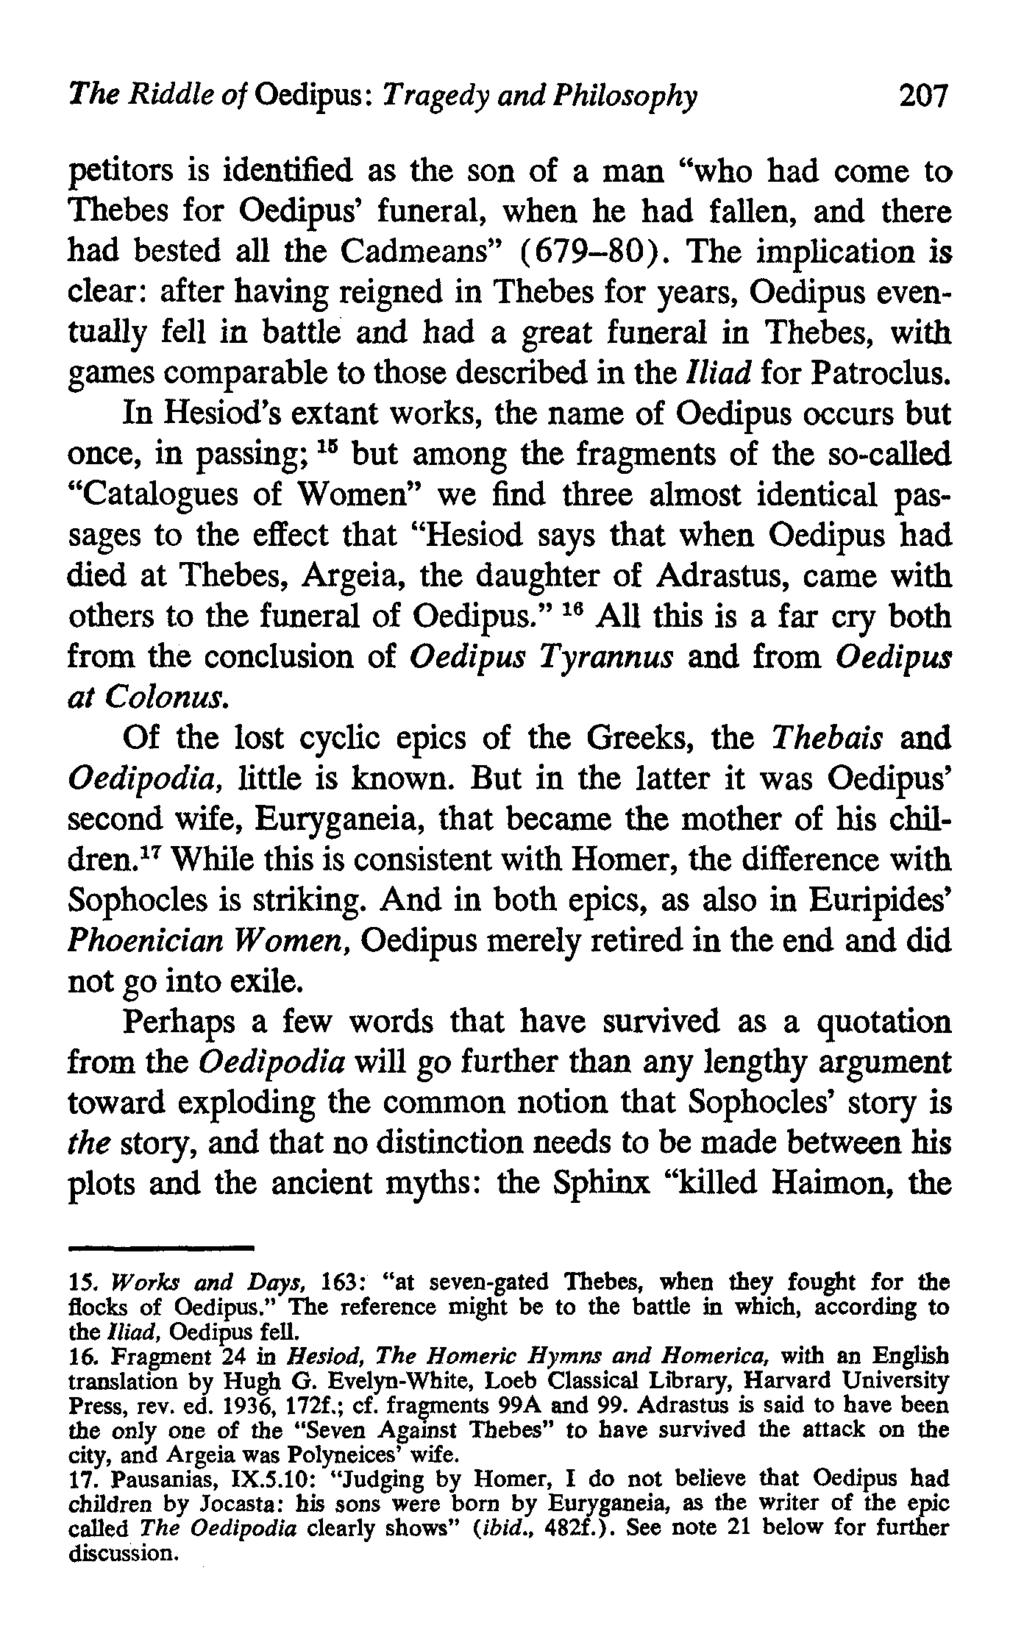 The Riddle of Oedipus: Tragedy and Philosophy 207 petitors is identified as the son of a man "who had come to Thebes for Oedipus' funeral, when he had fallen, and there had bested all the Cadmeans"